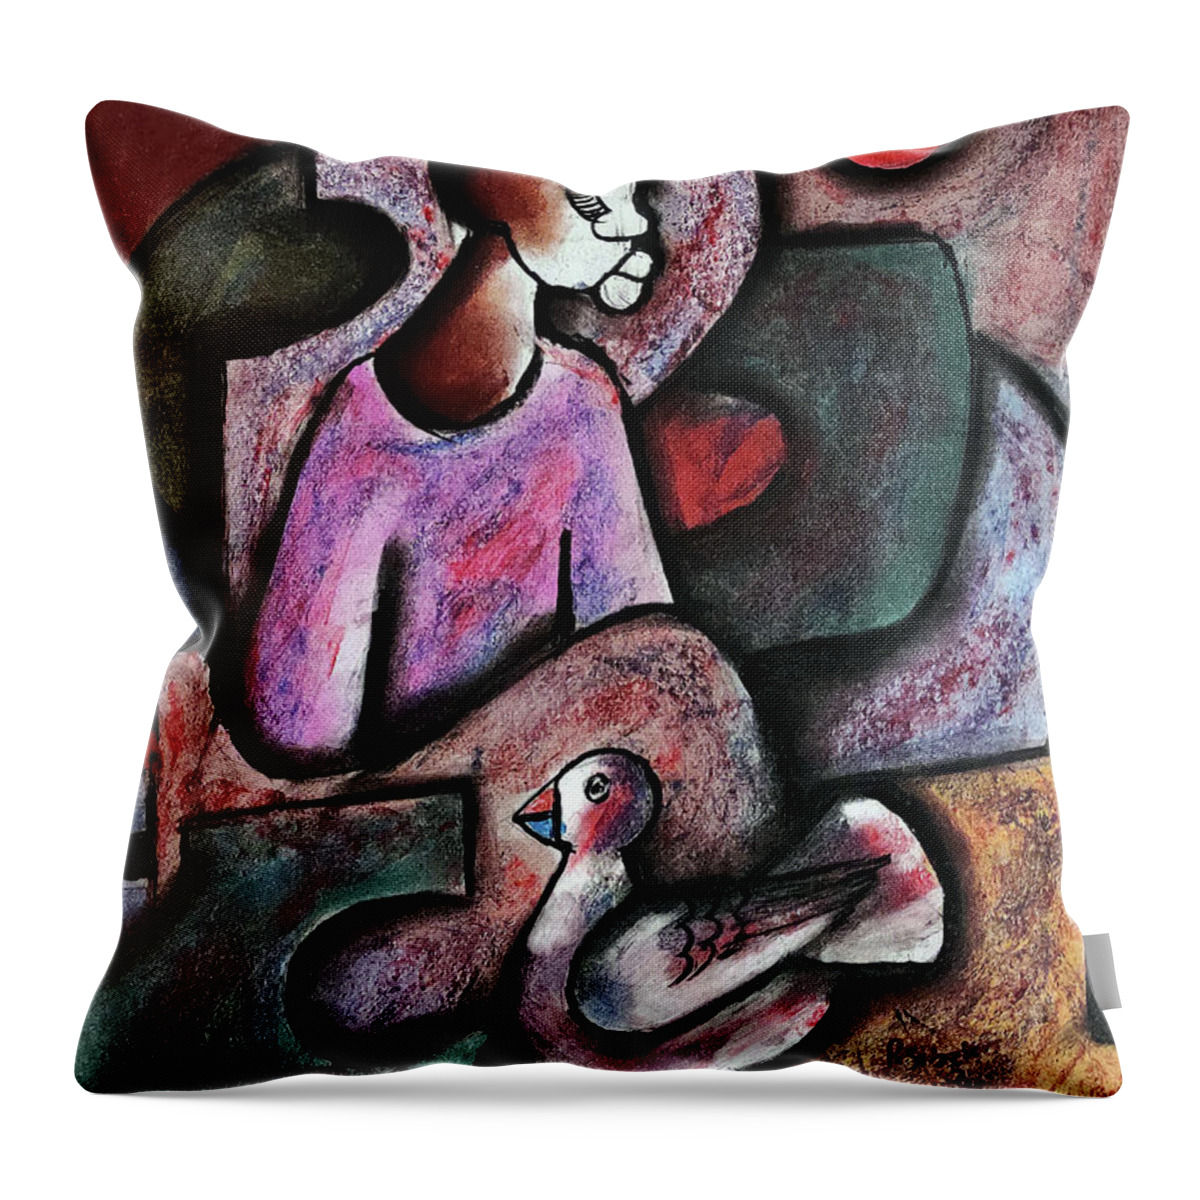 African Art Throw Pillow featuring the painting Dove Of Peace #1 by Peter Sibeko 1940-2013